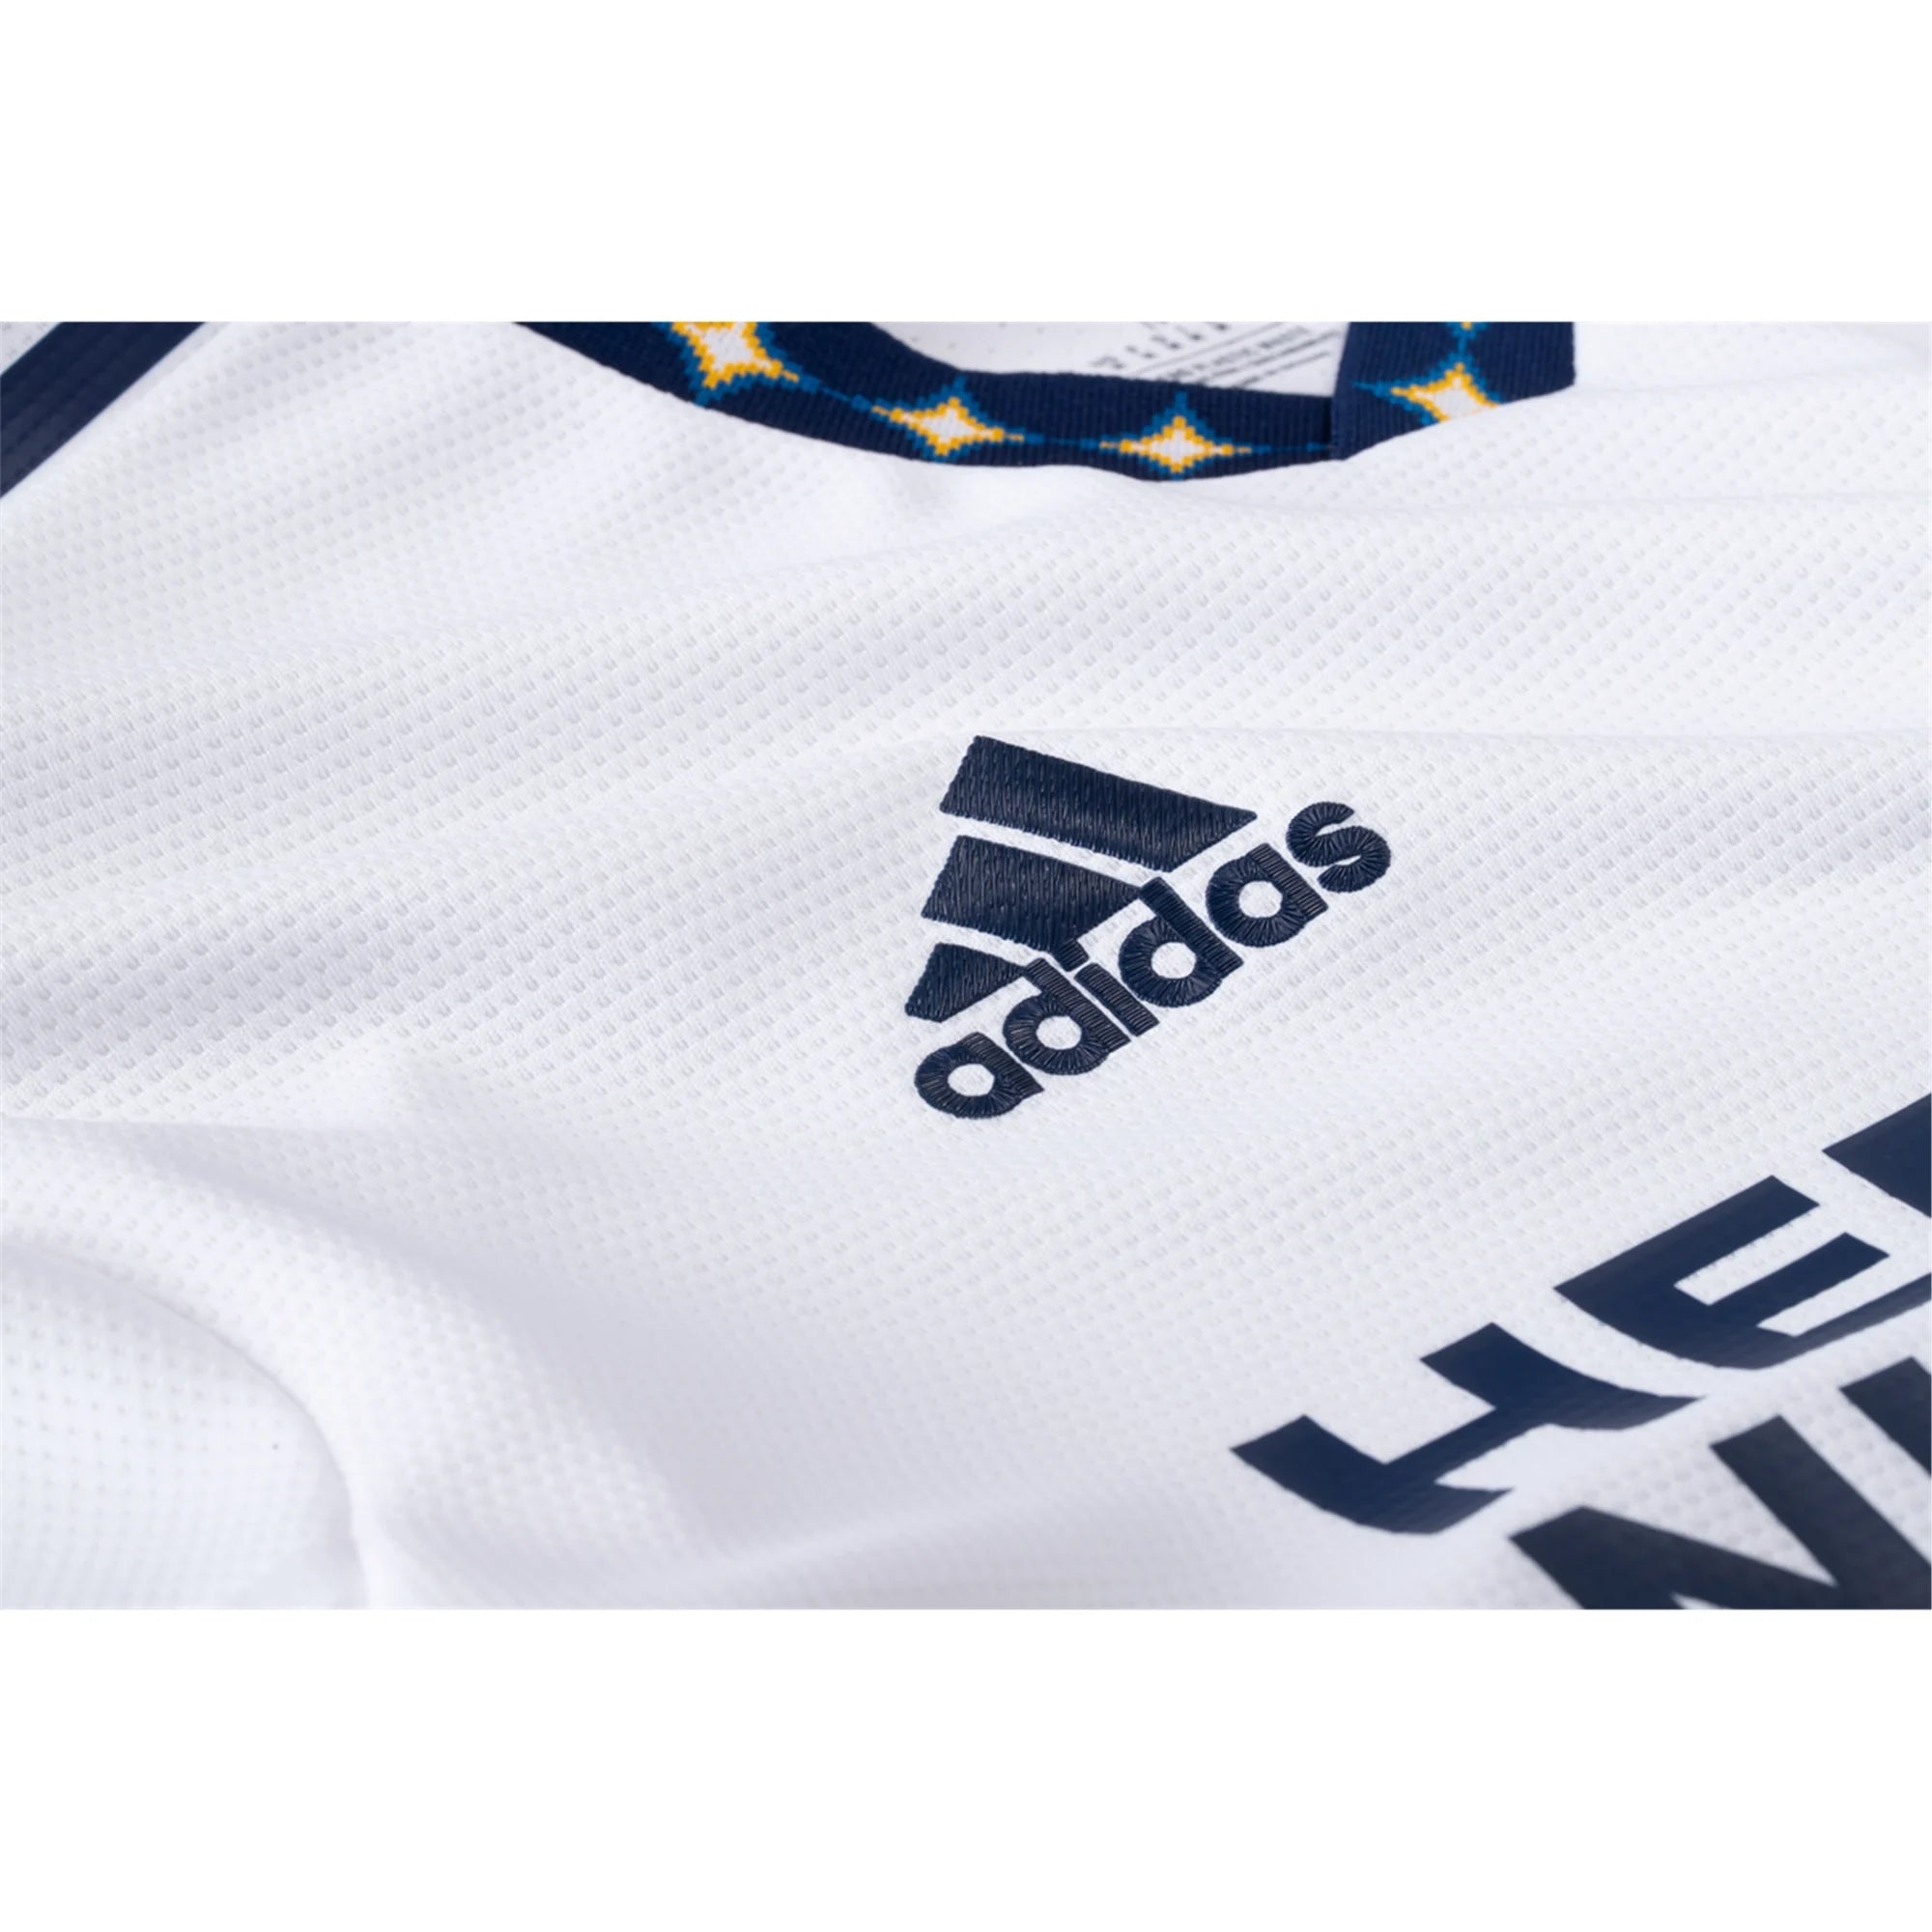 Adidas Riqui Puig La Galaxy Home Authentic Jersey 22/23 w/ MLS Patches (White) Size XL